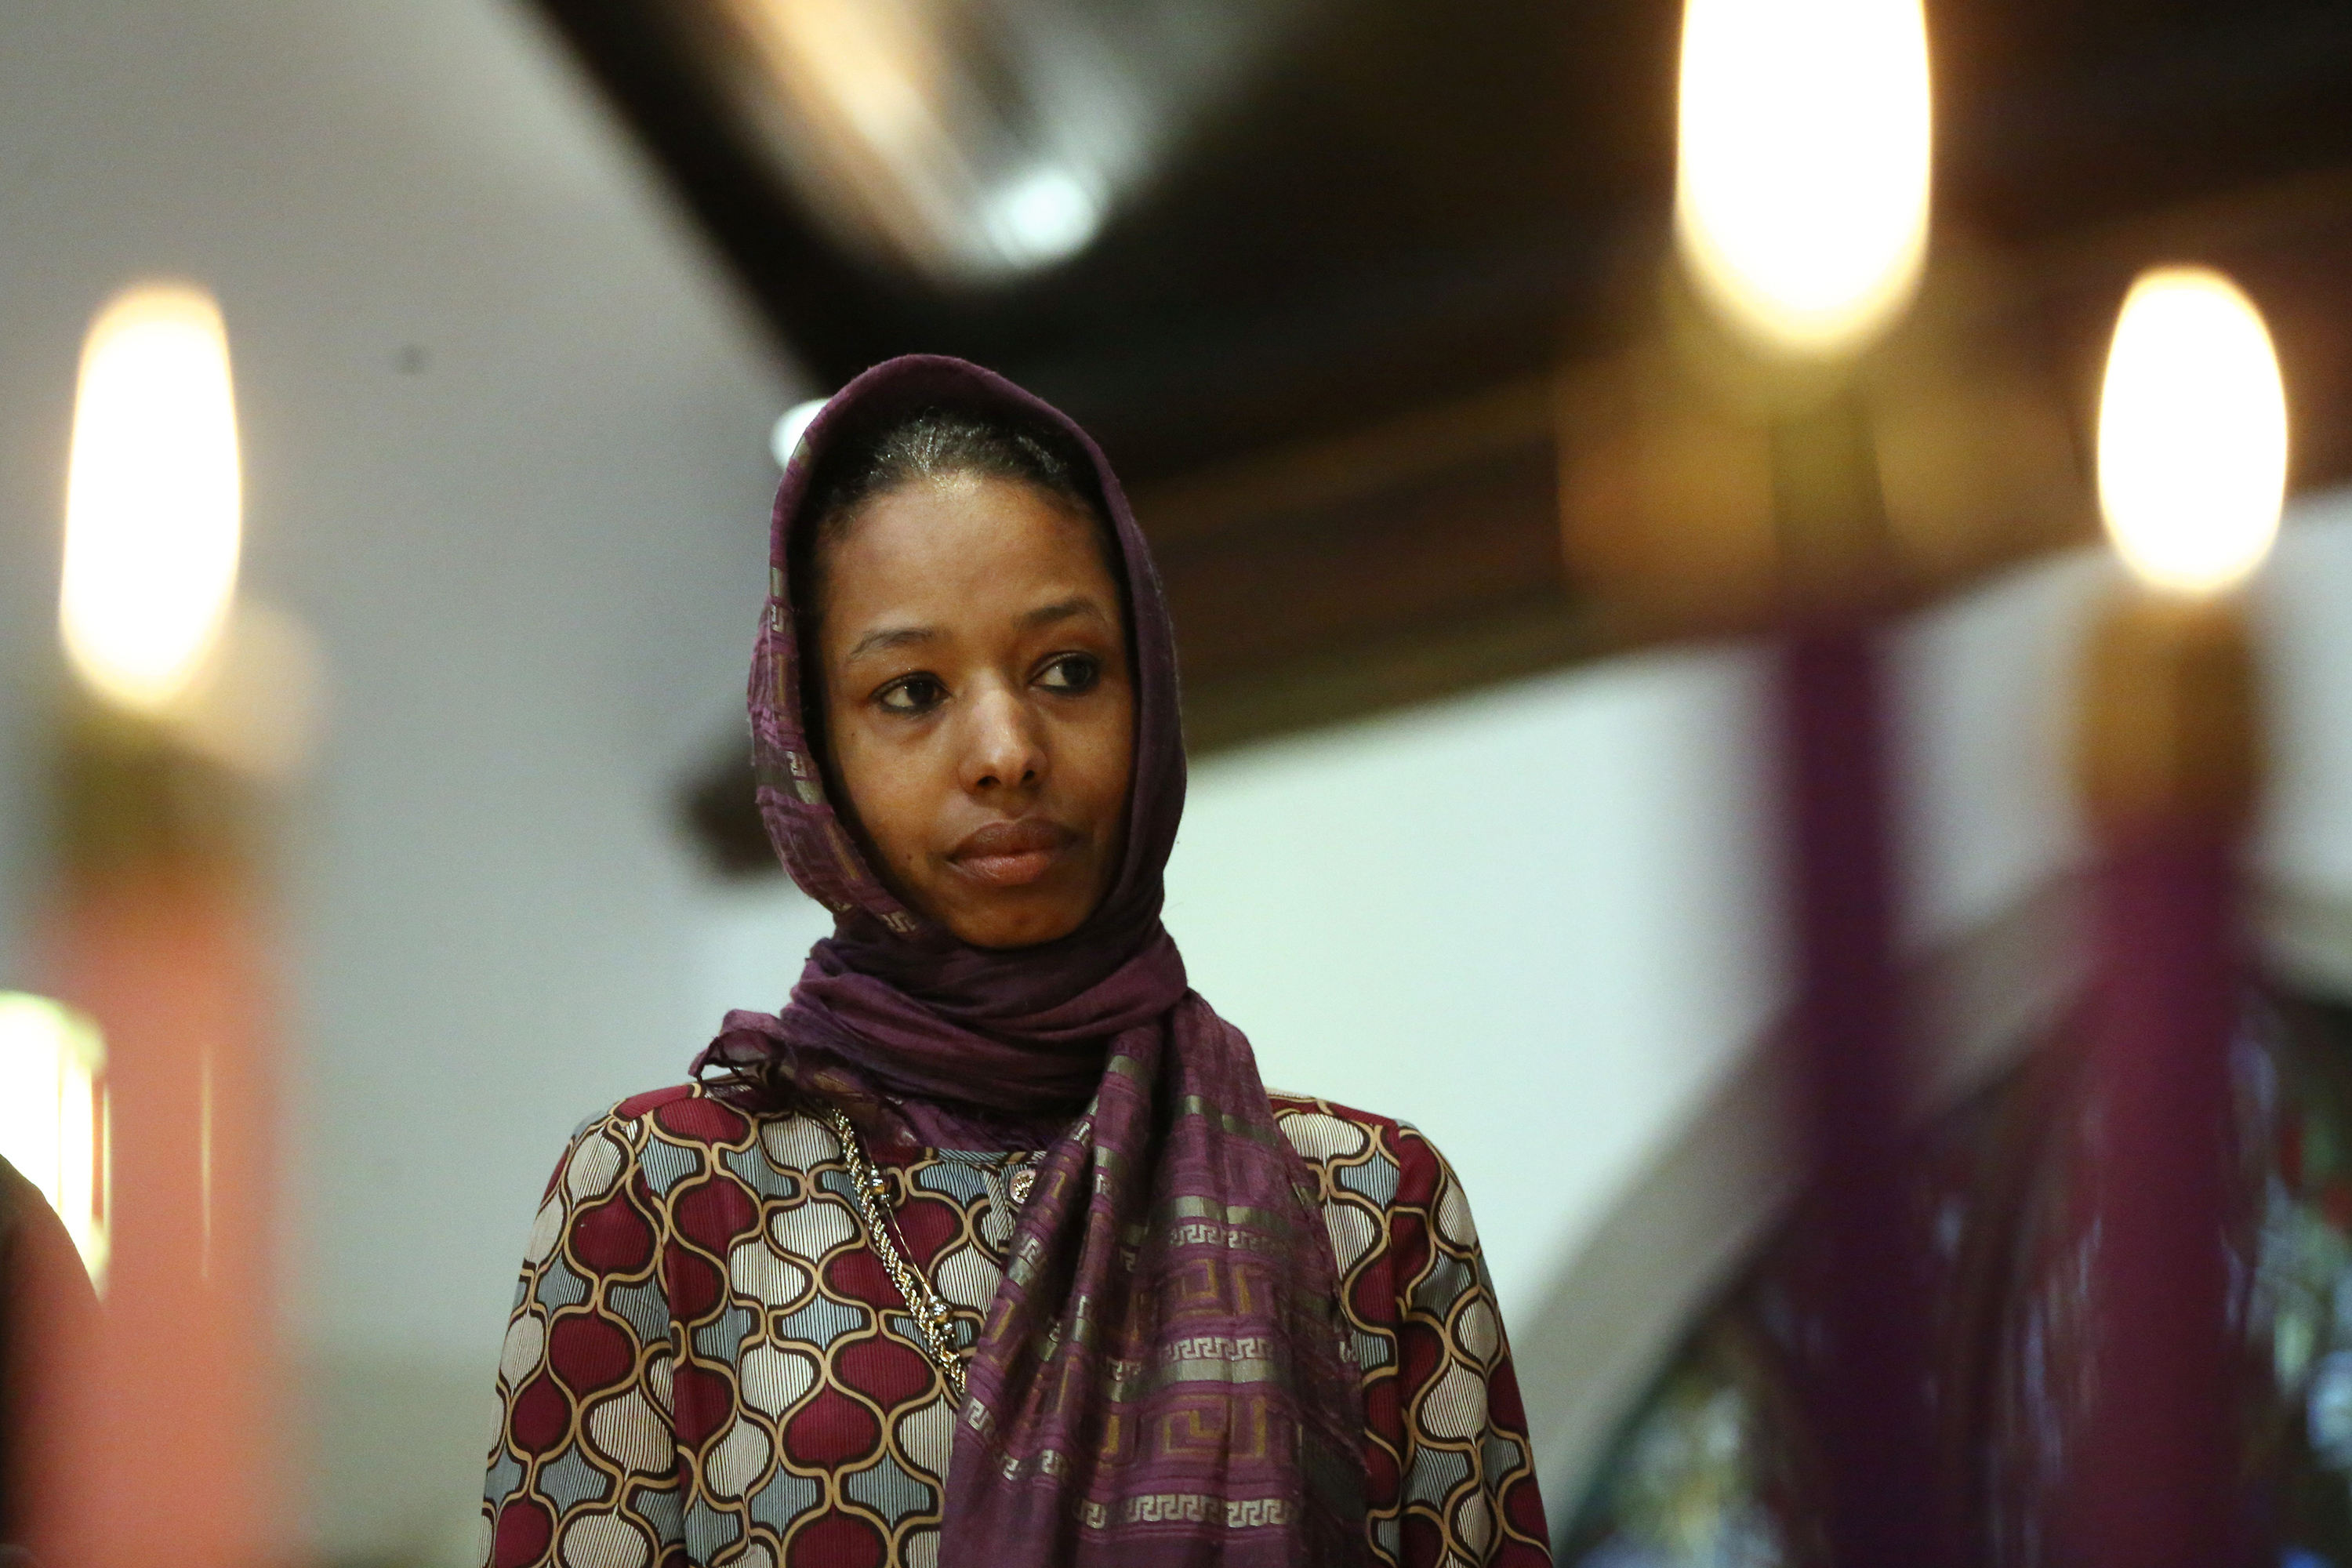 Larycia Hawkins, a Christian who is wearing a hijab over Advent in solidarity with Muslims, attends service at St. Martin Episcopal Church in Chicago on Dec. 13, 2015. (Stacey Wescott—Chicago Tribune/TNS via Getty Images)